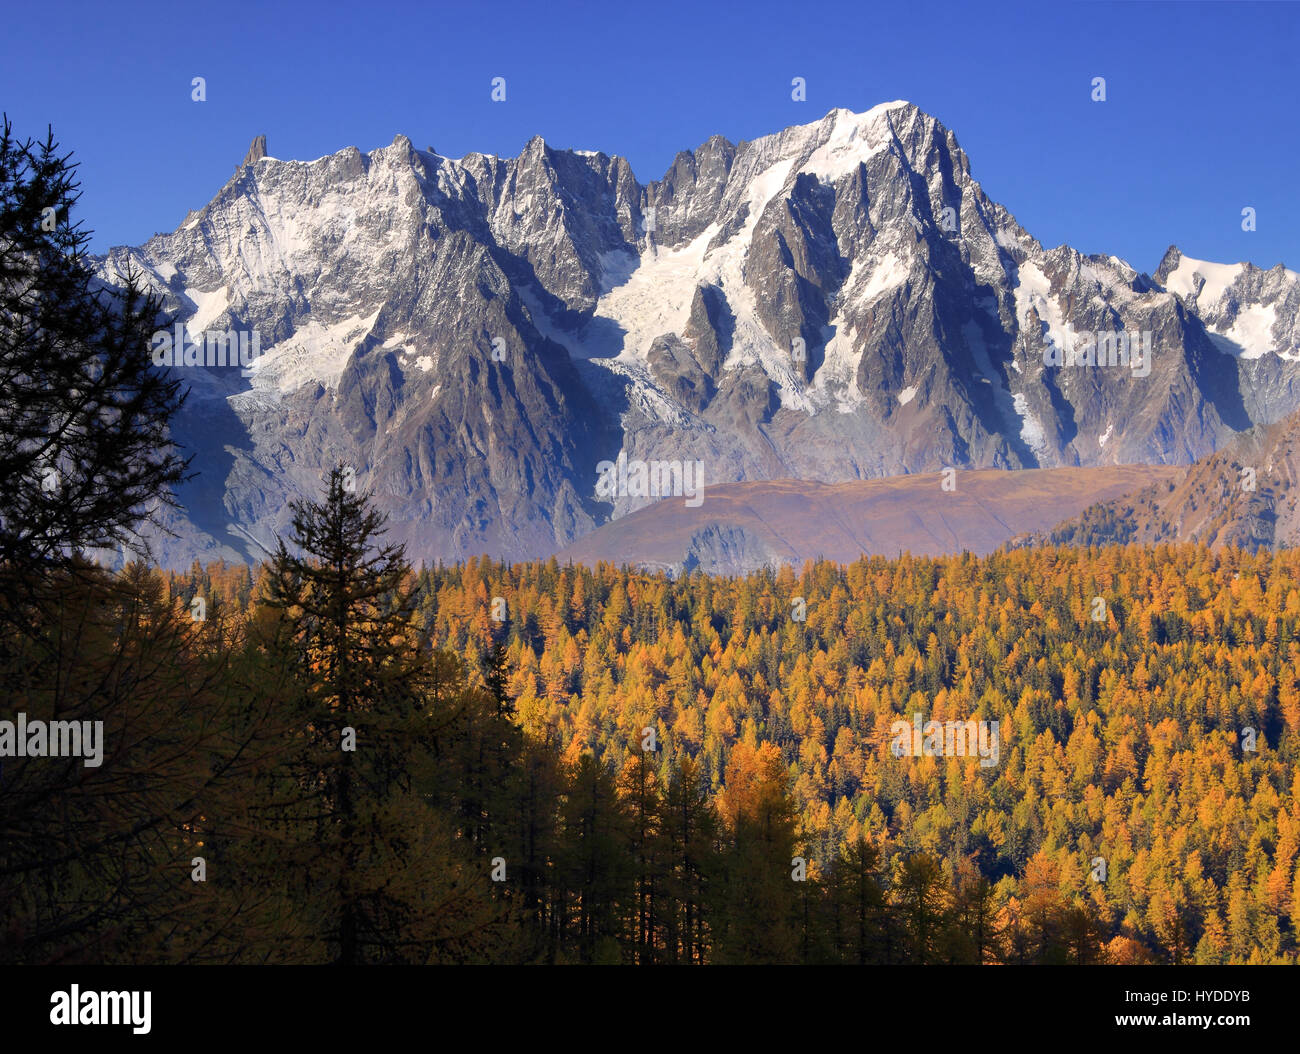 A view of the majestic northeastern portion of the Monte Bianco/Mont Blanc - from Dente del Gigante/Dent du Geant to Les Grandes Jorasses, with the fi Stock Photo